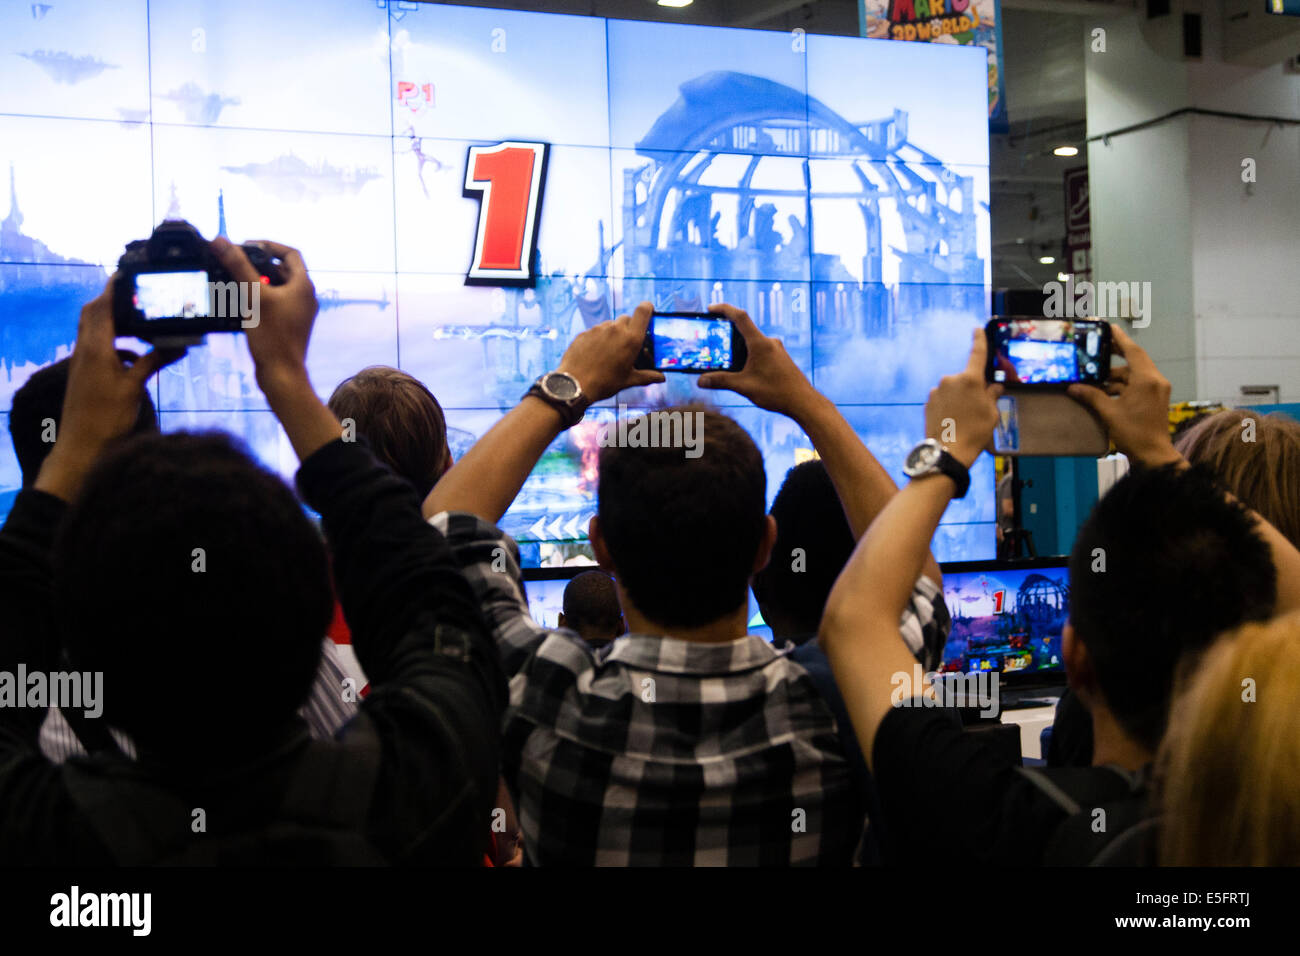 LONDON, ENGLAND The crowd takes photographs of video games at Hyper Japan at Ears Court. Stock Photo